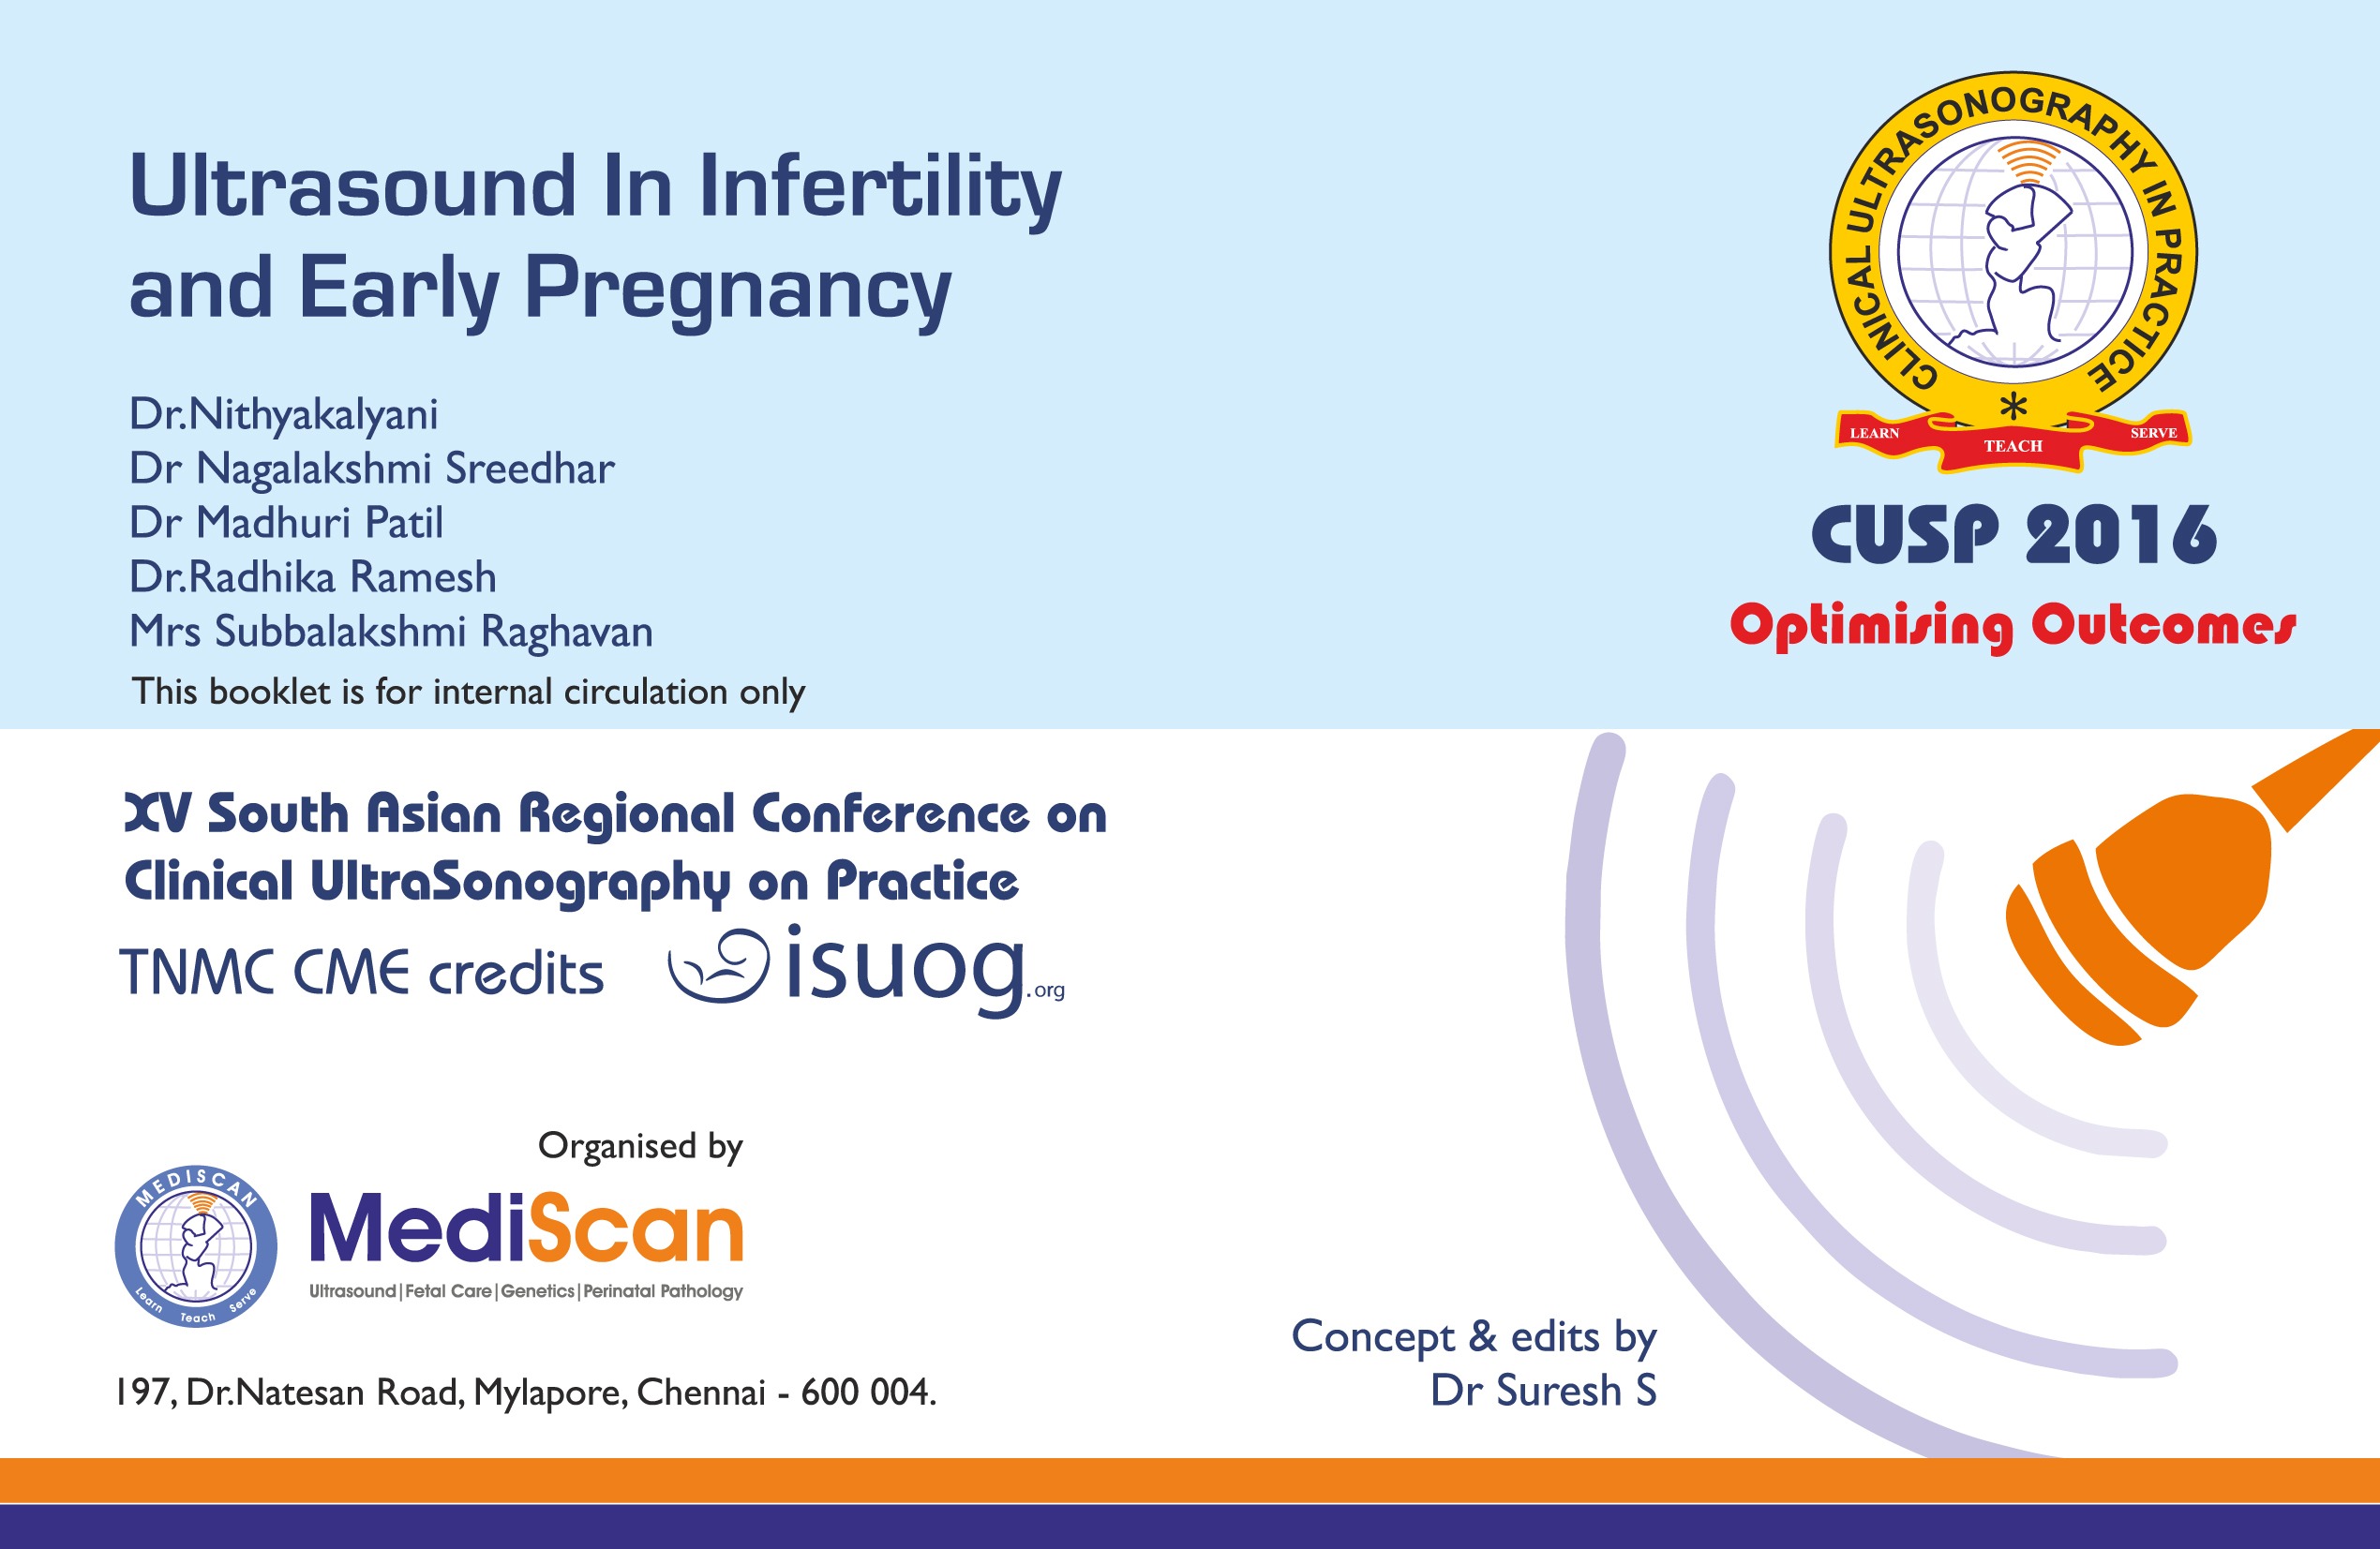 USG-in-Infertility-and-Early-Pregnancy-2016